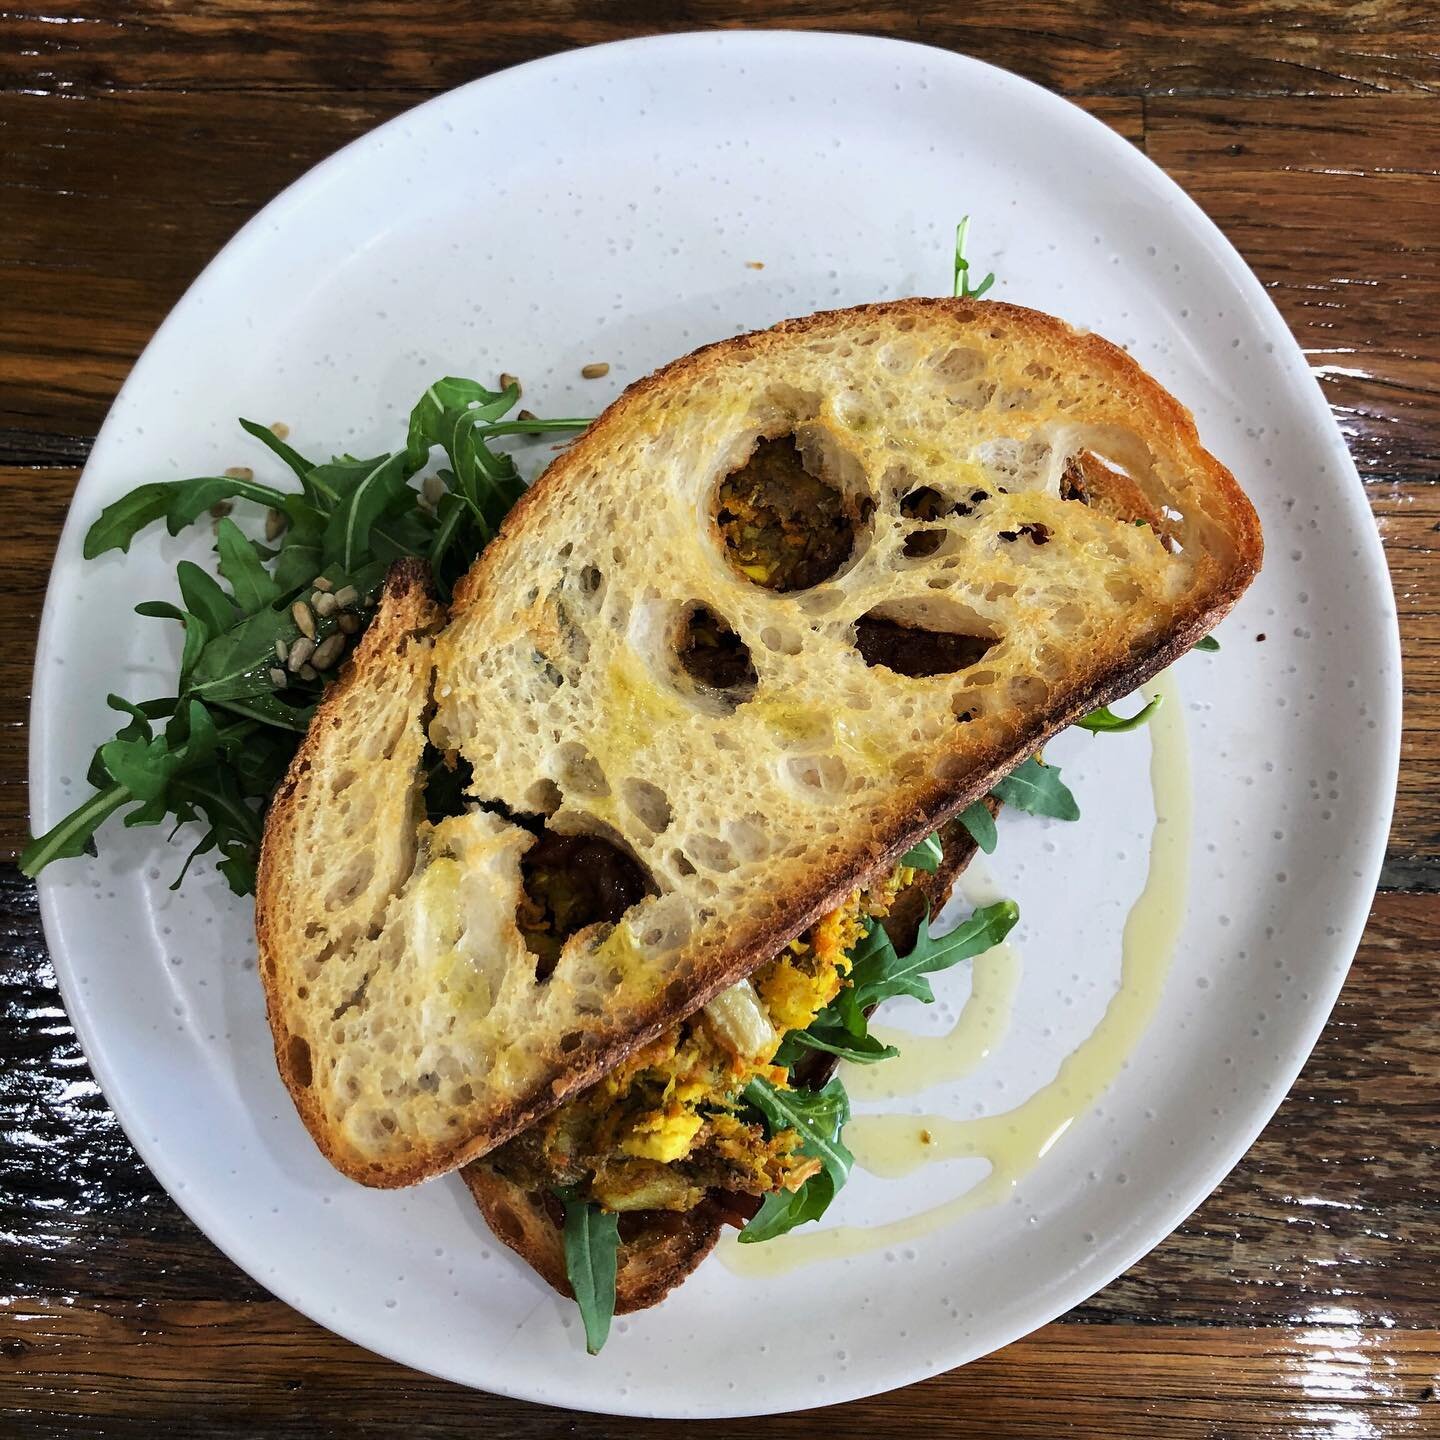 🥪NEW SPECIAL
Pastured chicken patty on sourdough + homemade tomato relish &amp; rocket. 
🍗 Our chicken patty&rsquo;s are handmade with fresh organic ingredients and are packed with vegetables &amp; delicious spices. 

#allgoodthings #organic #homem